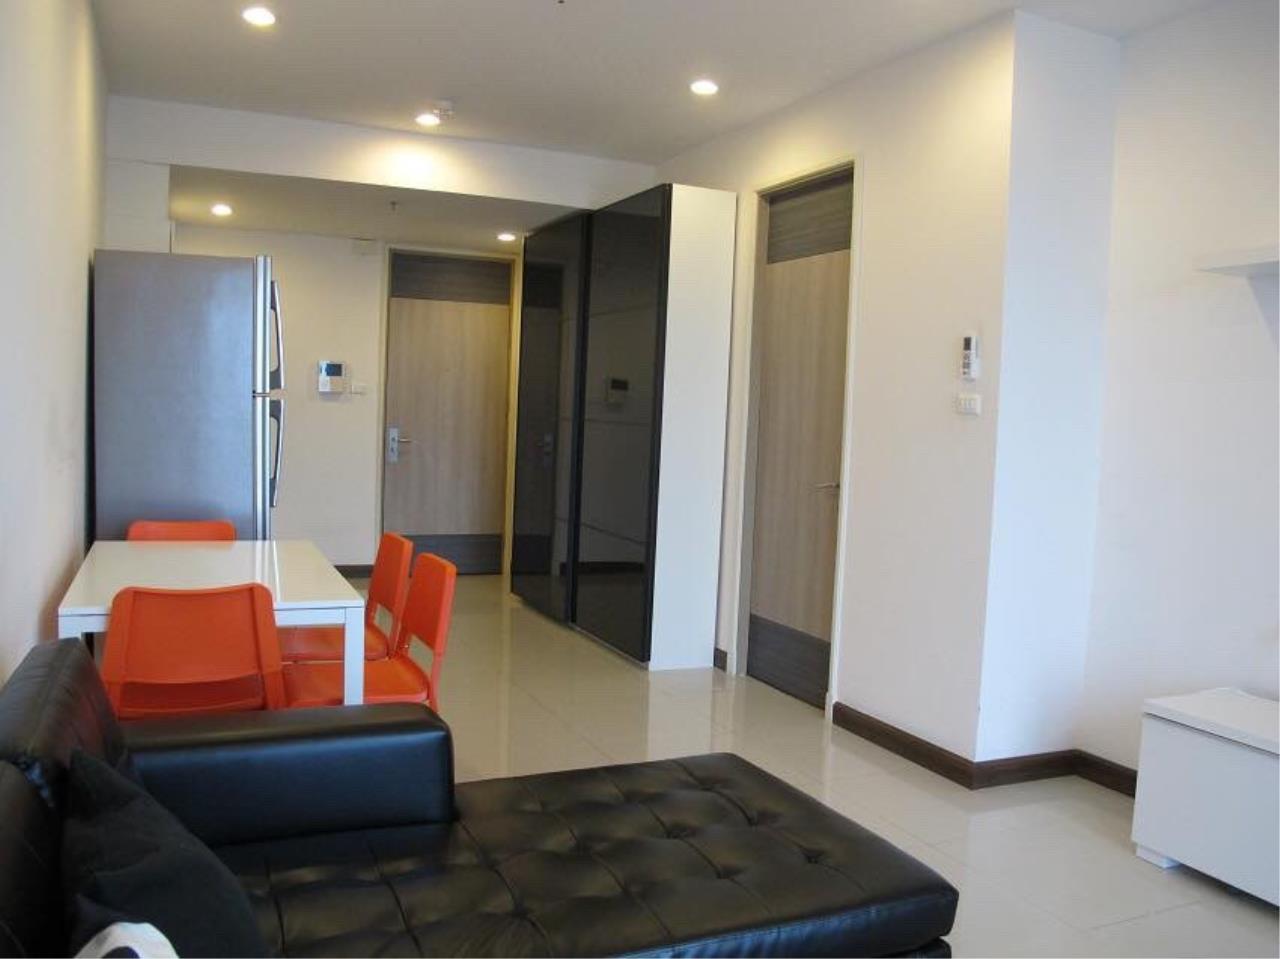 Agent - Phapayawarin Agency's For Sale :  Supalai Premier Ratchathewi, great city view, 1 bedroom 1 bathroom, 62.39 sq.m  3